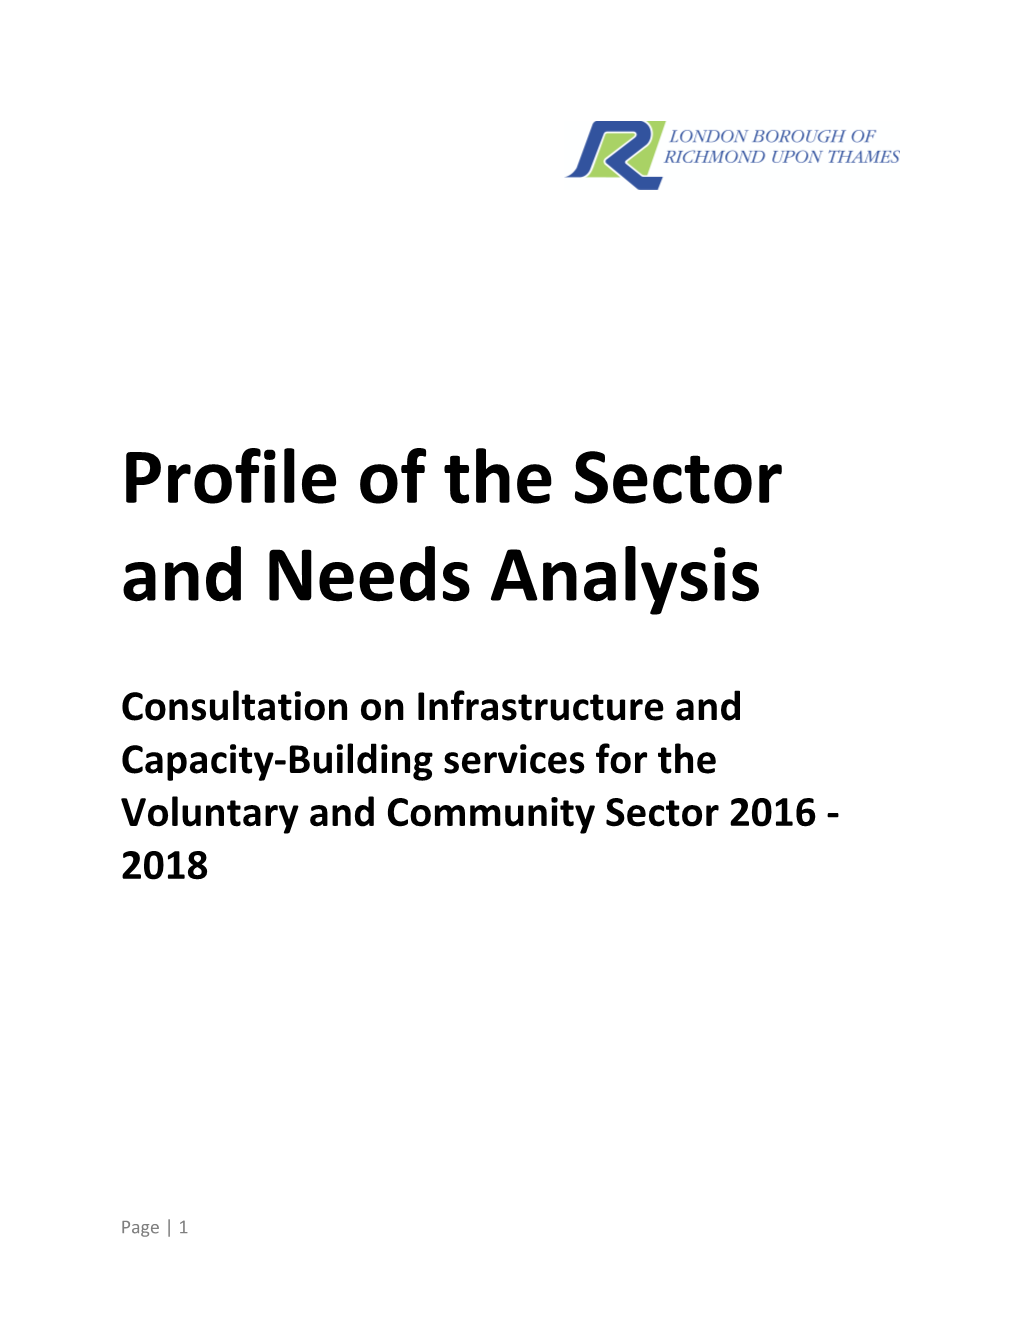 Options Paper: Commissioning Infrastructure and Capacity-Building Services in the Voluntary